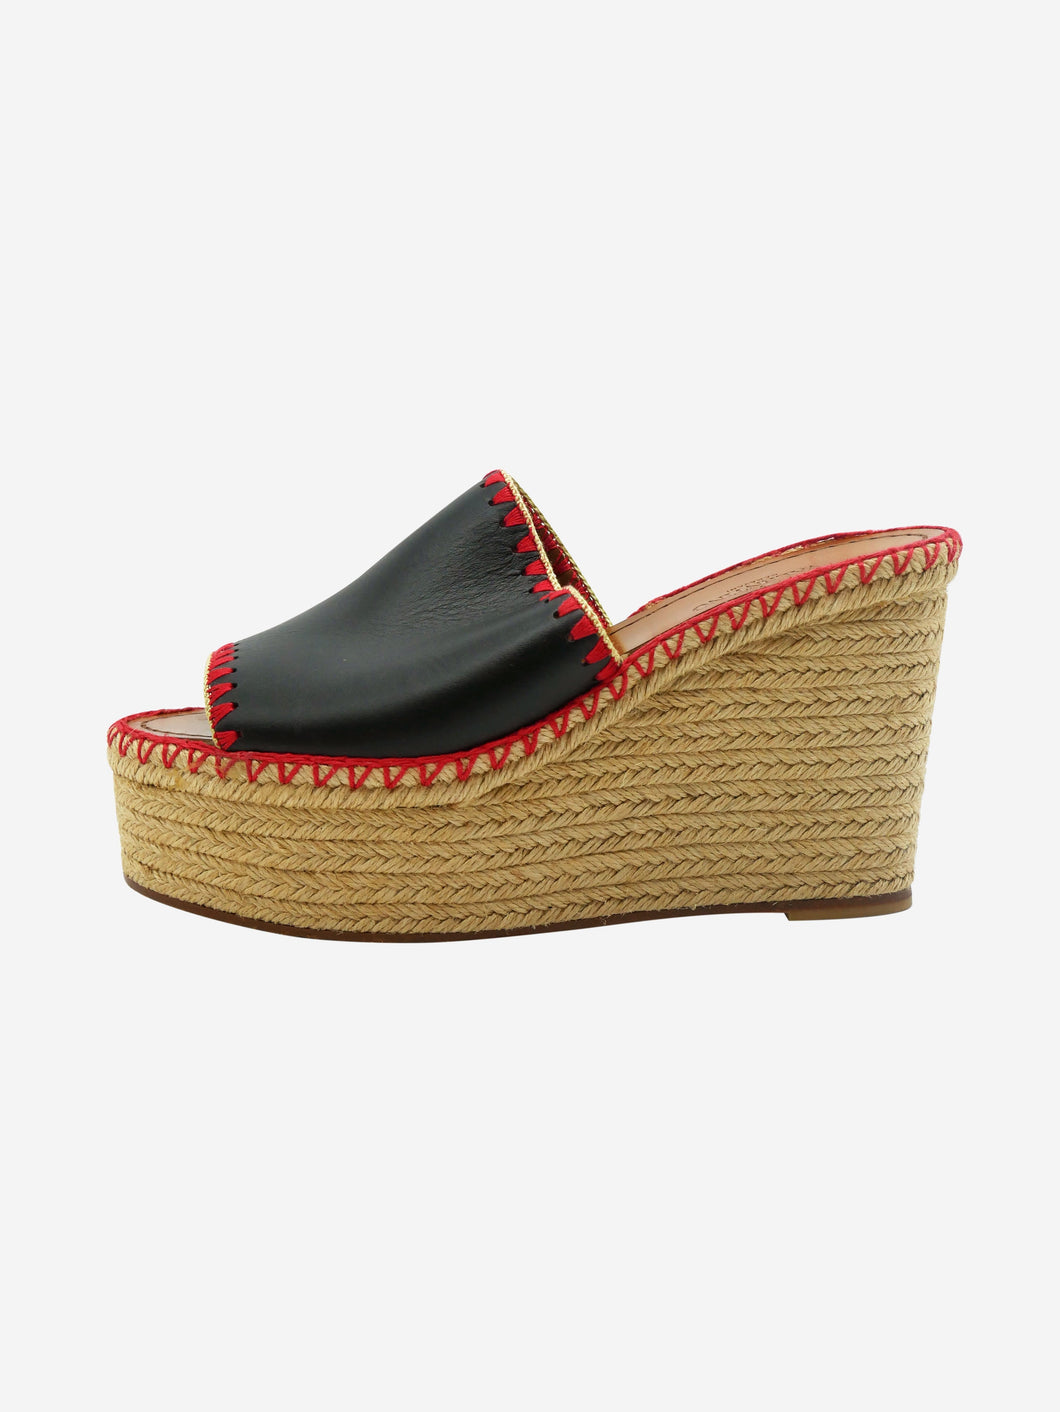 Black espadrille wedge sandals with leather strap - size EU 38 Heels Valentino 